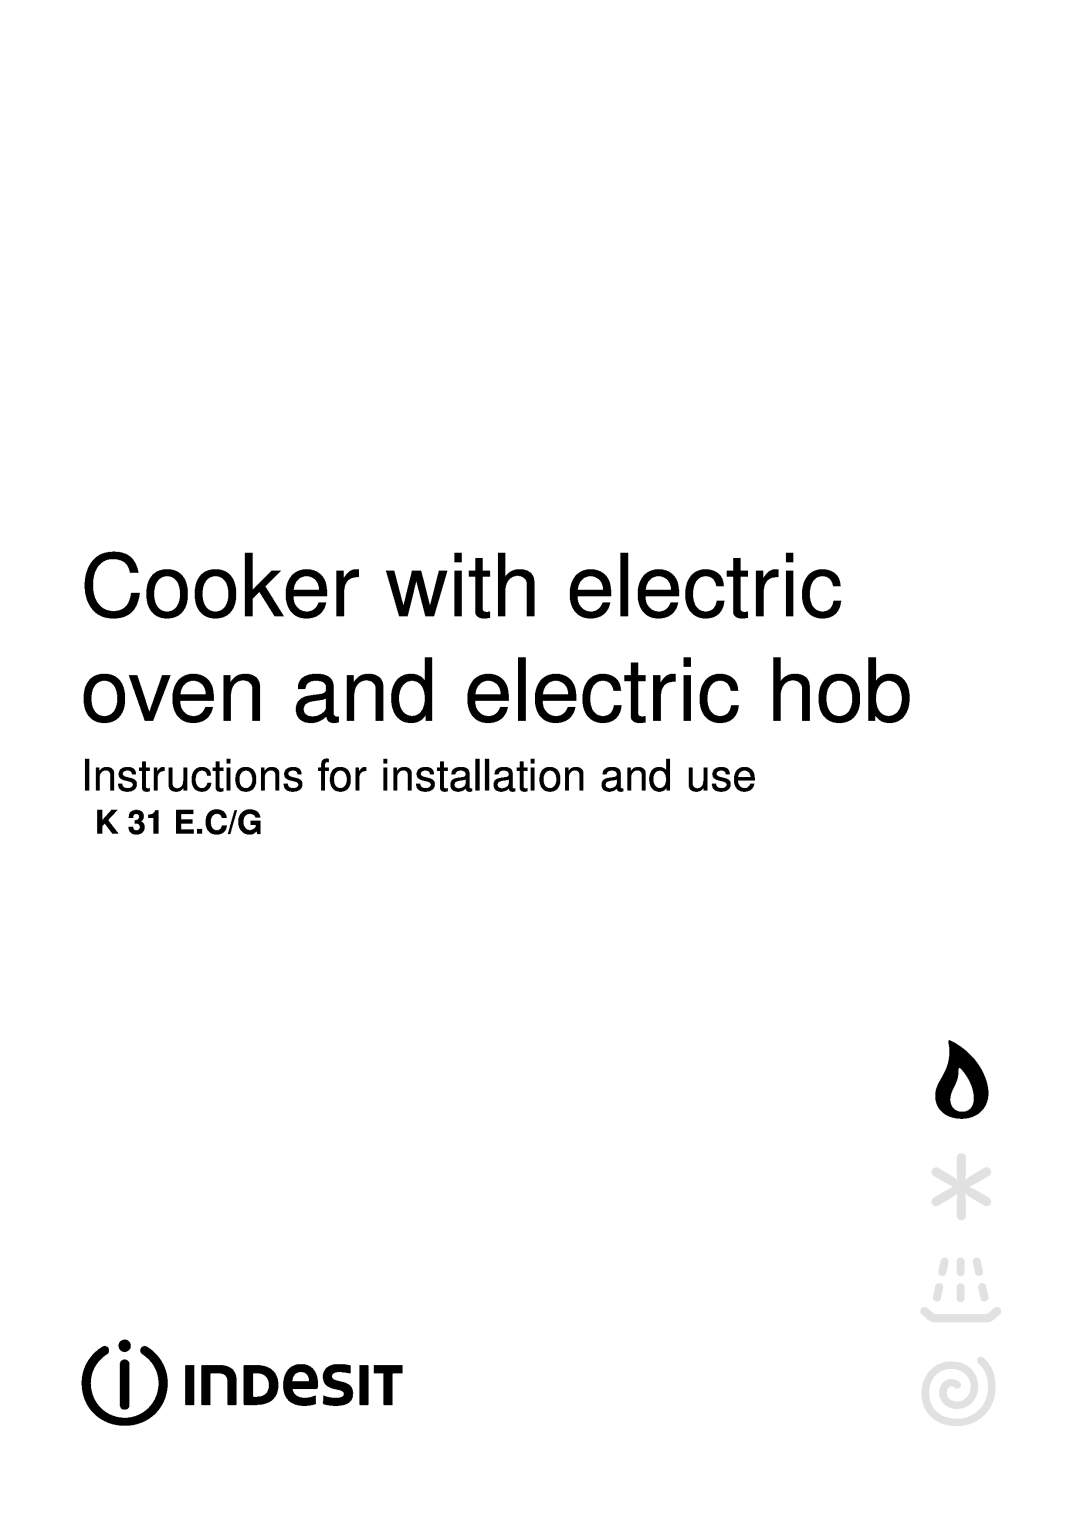 Indesit K31ECG manual Cooker with electric oven and electric hob, Instructions for installation and use, K 31 E.C/G 